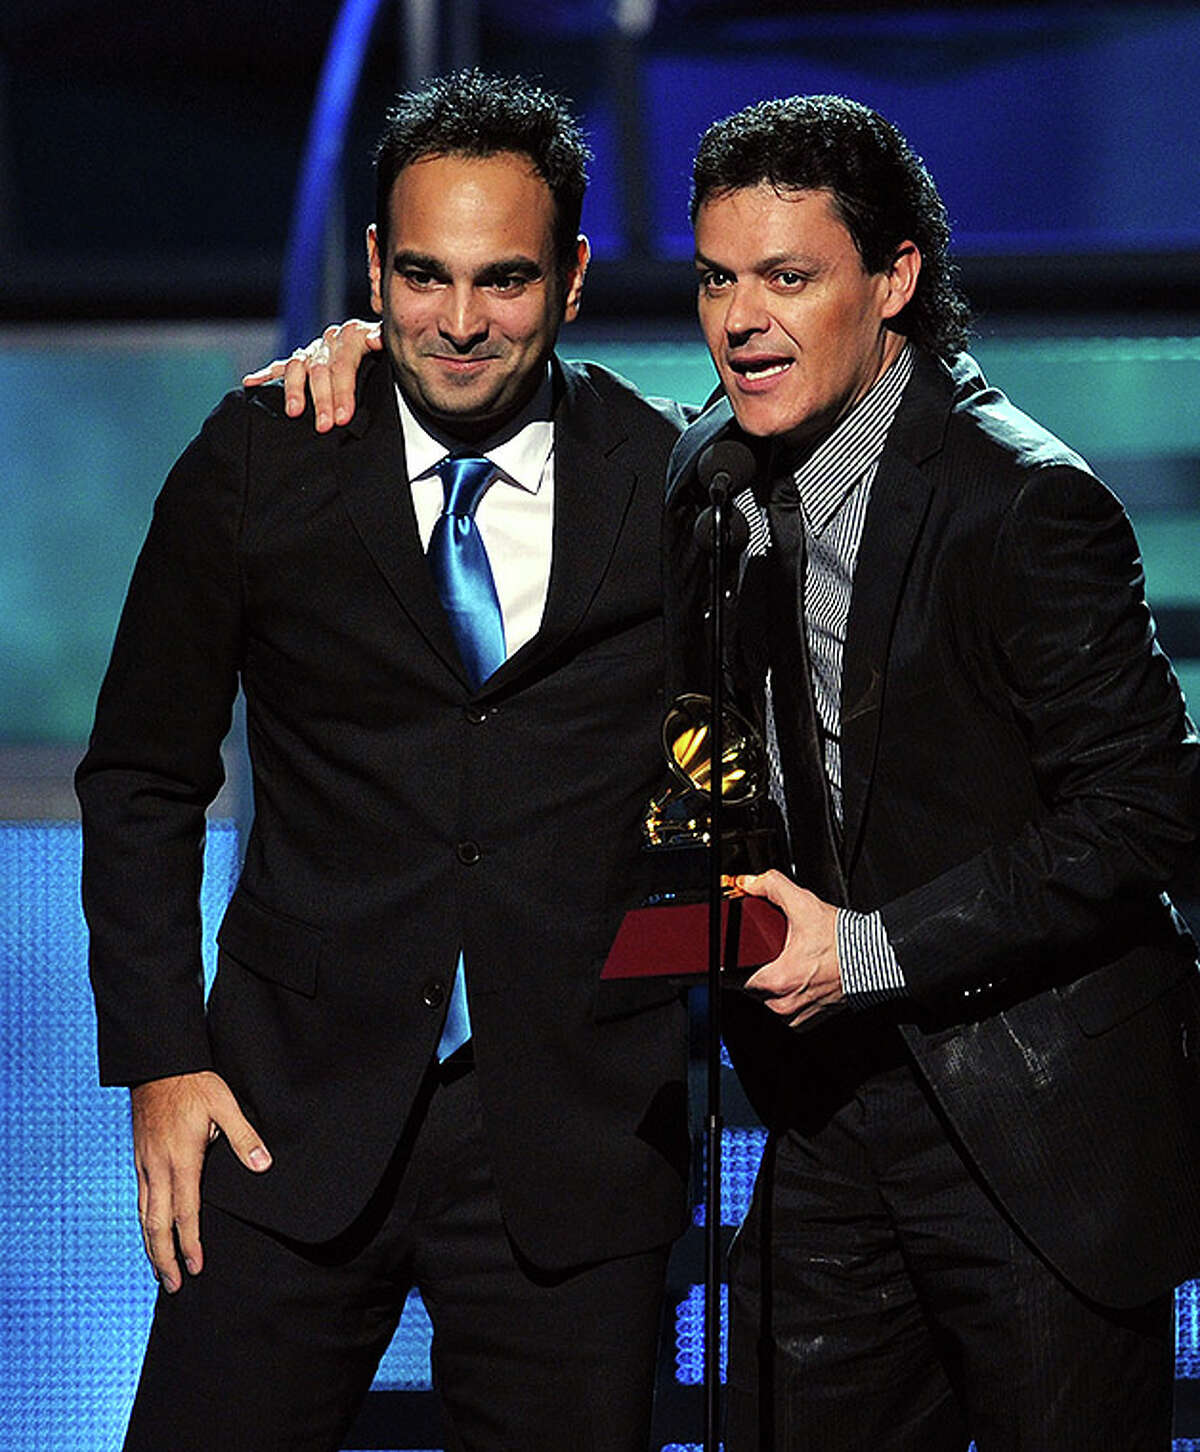 LAS VEGAS - NOVEMBER 11: Yoel Henriquez (L) and Pedro Fernandez accept the Best Regional Mexican Song award onstage during the 11th annual Latin GRAMMY Awards at the Mandalay Bay Events Center on November 11, 2010 in Las Vegas, Nevada. (Photo by Kevin Winter/Getty Images for LARAS) *** Local Caption *** Yoel Henriquez;Pedro Fernandez